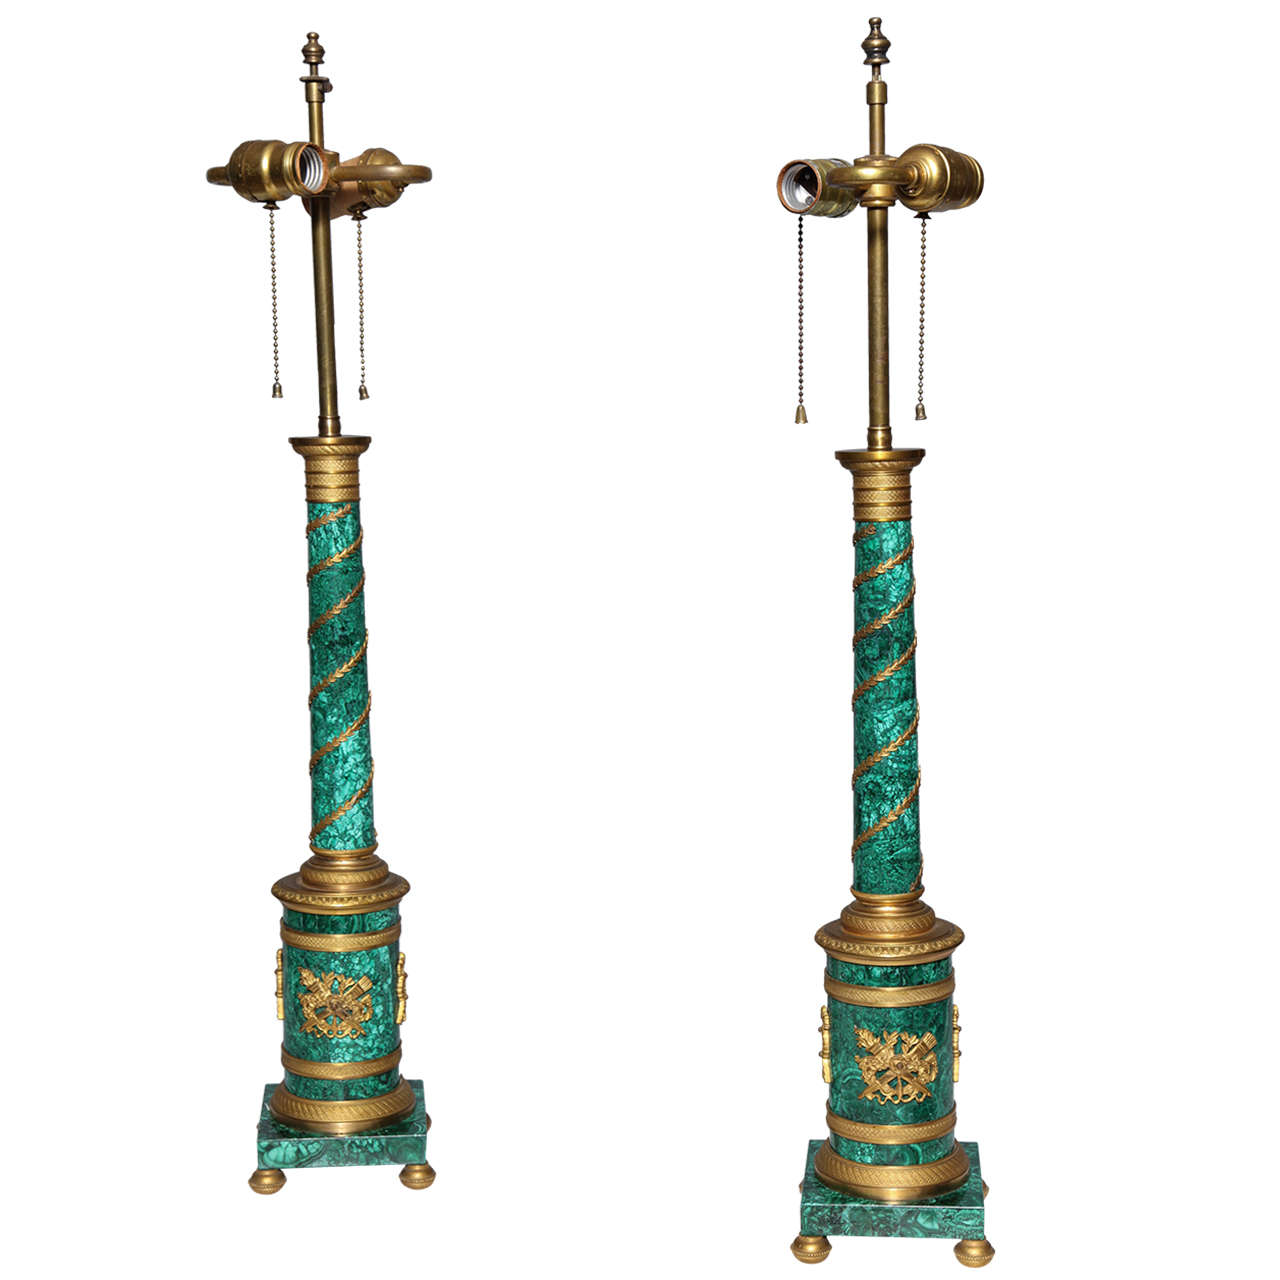 Pair of Russian Neoclassical Malachite and Gilt Bronze Column Table Lamps